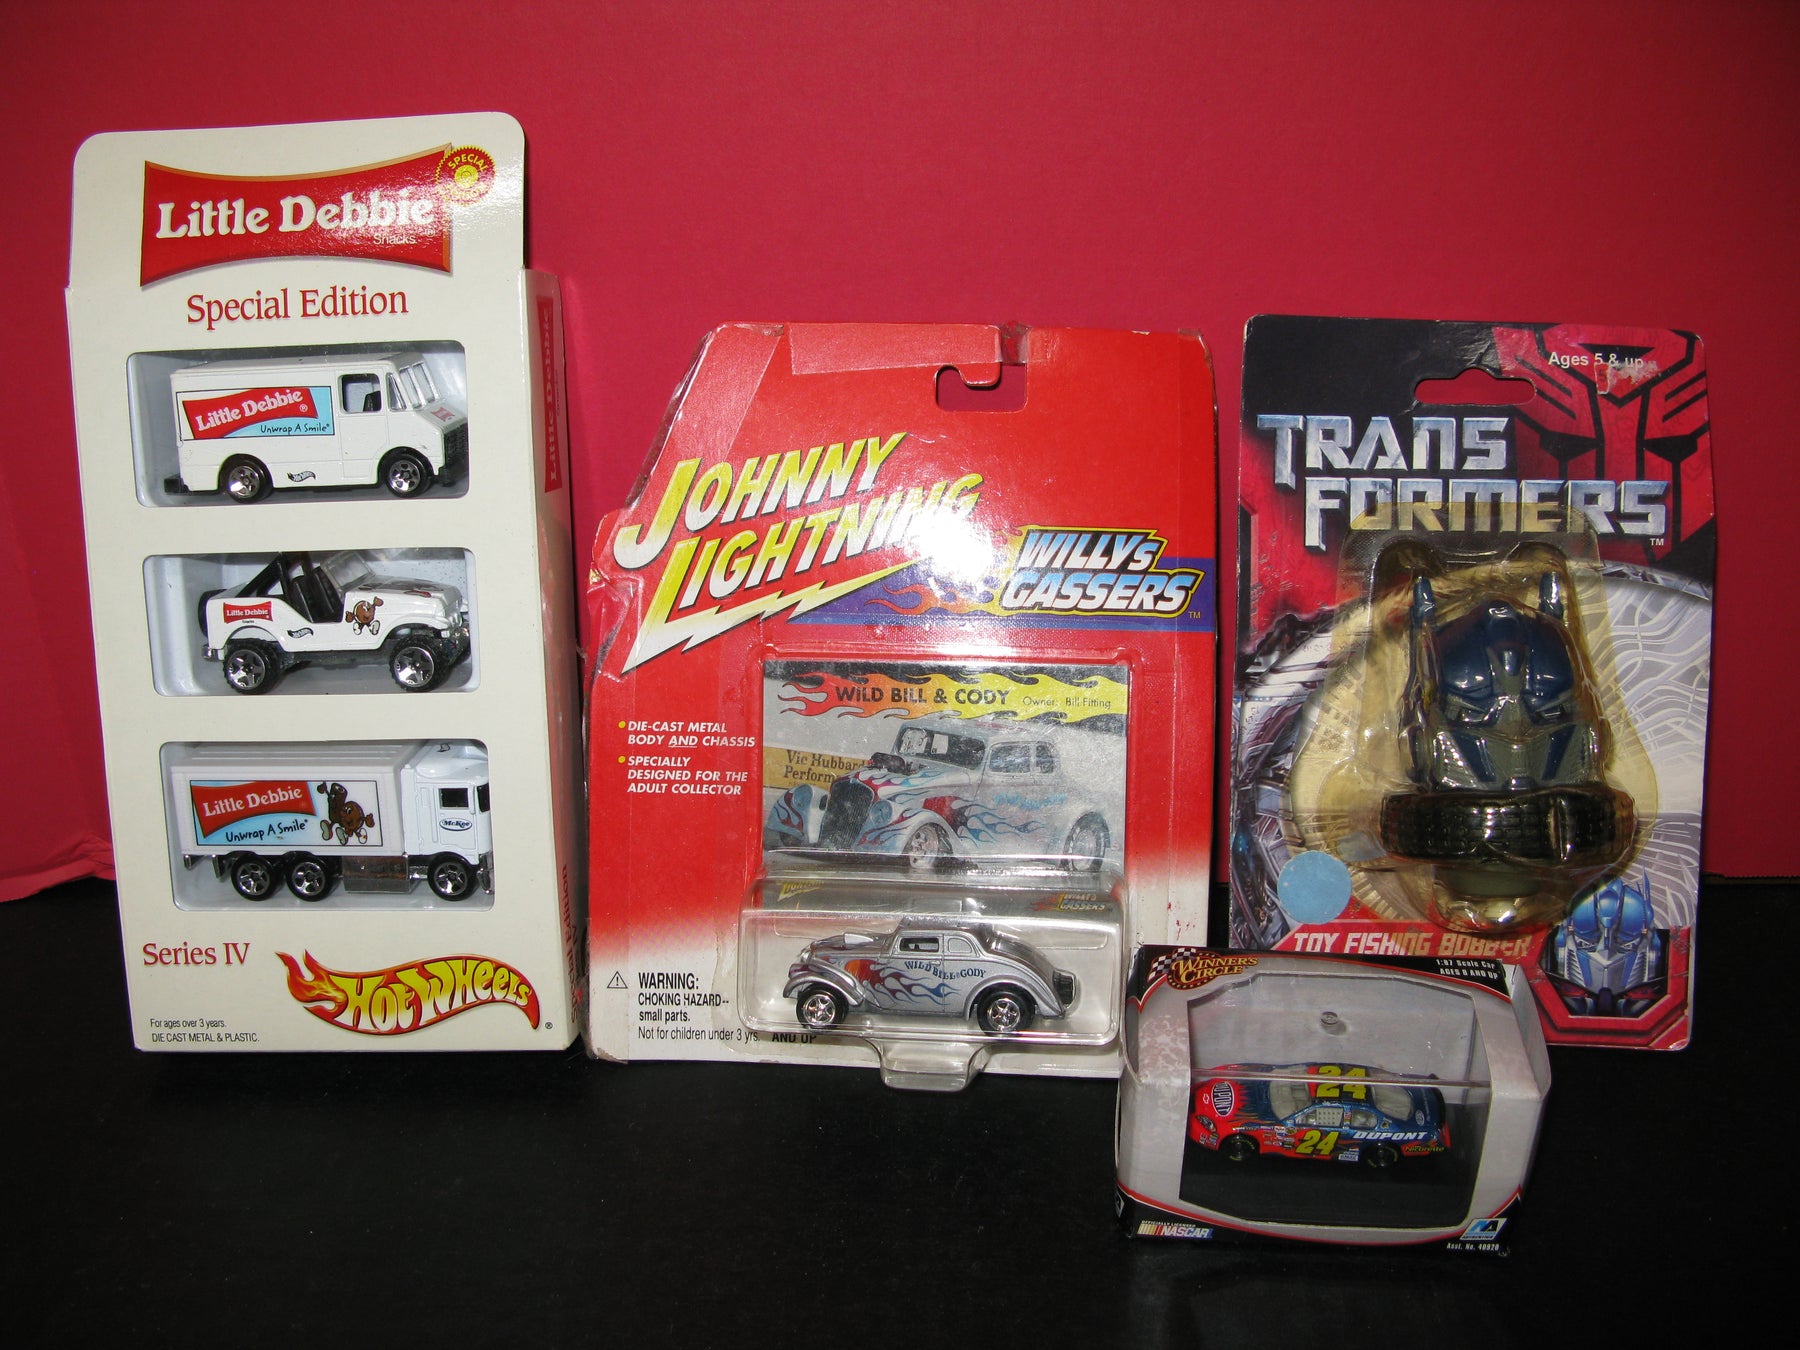 Race Cars and Toy Fishing Bobber